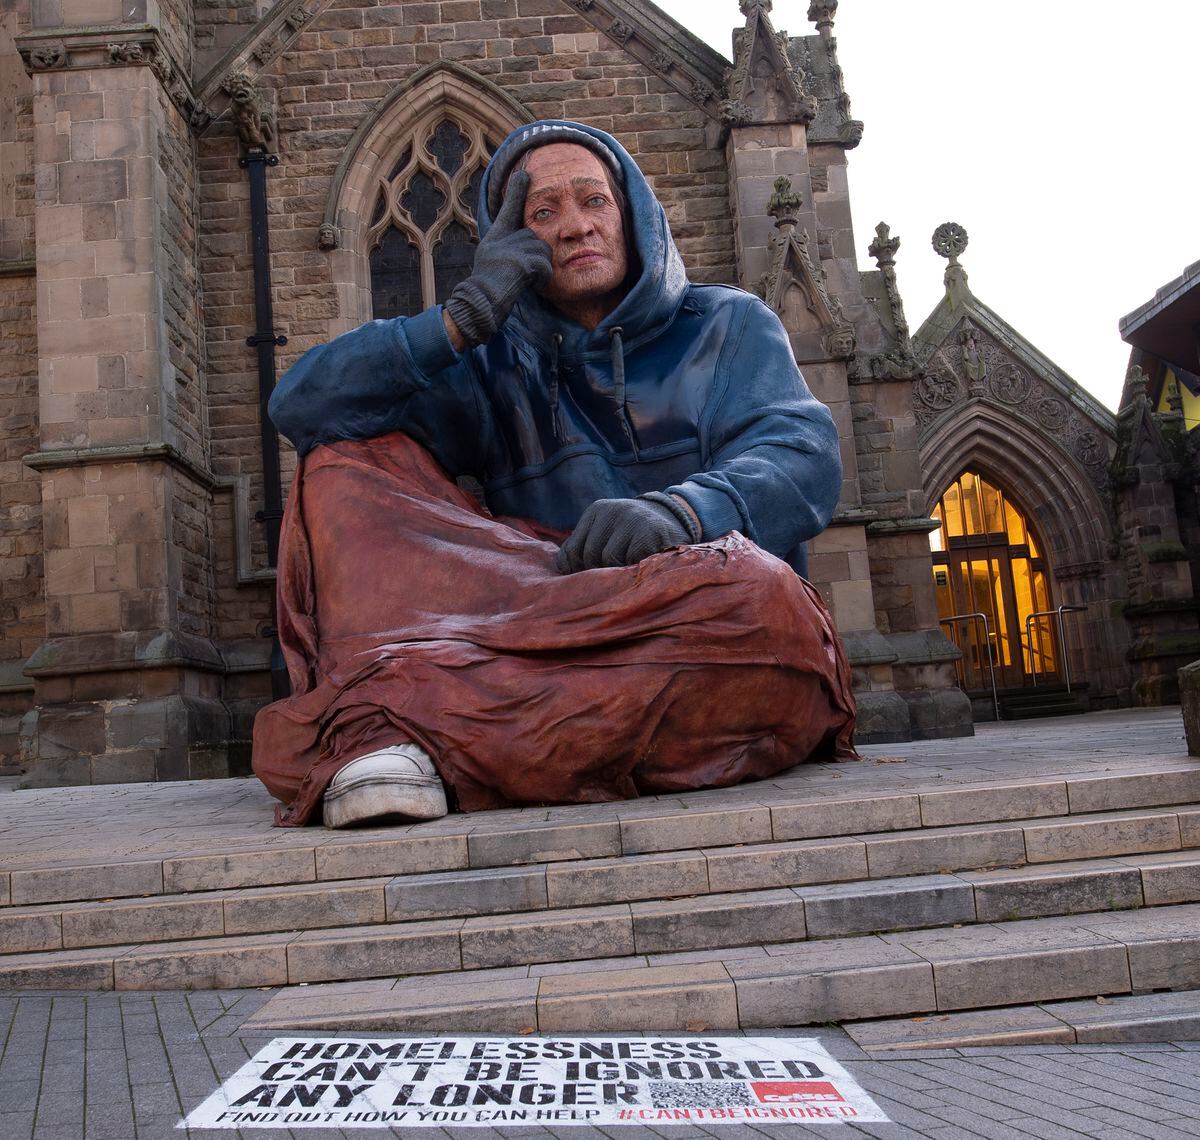 14ft hyper-real homeless sculpture unveiled in Birmingham by Crisis ...